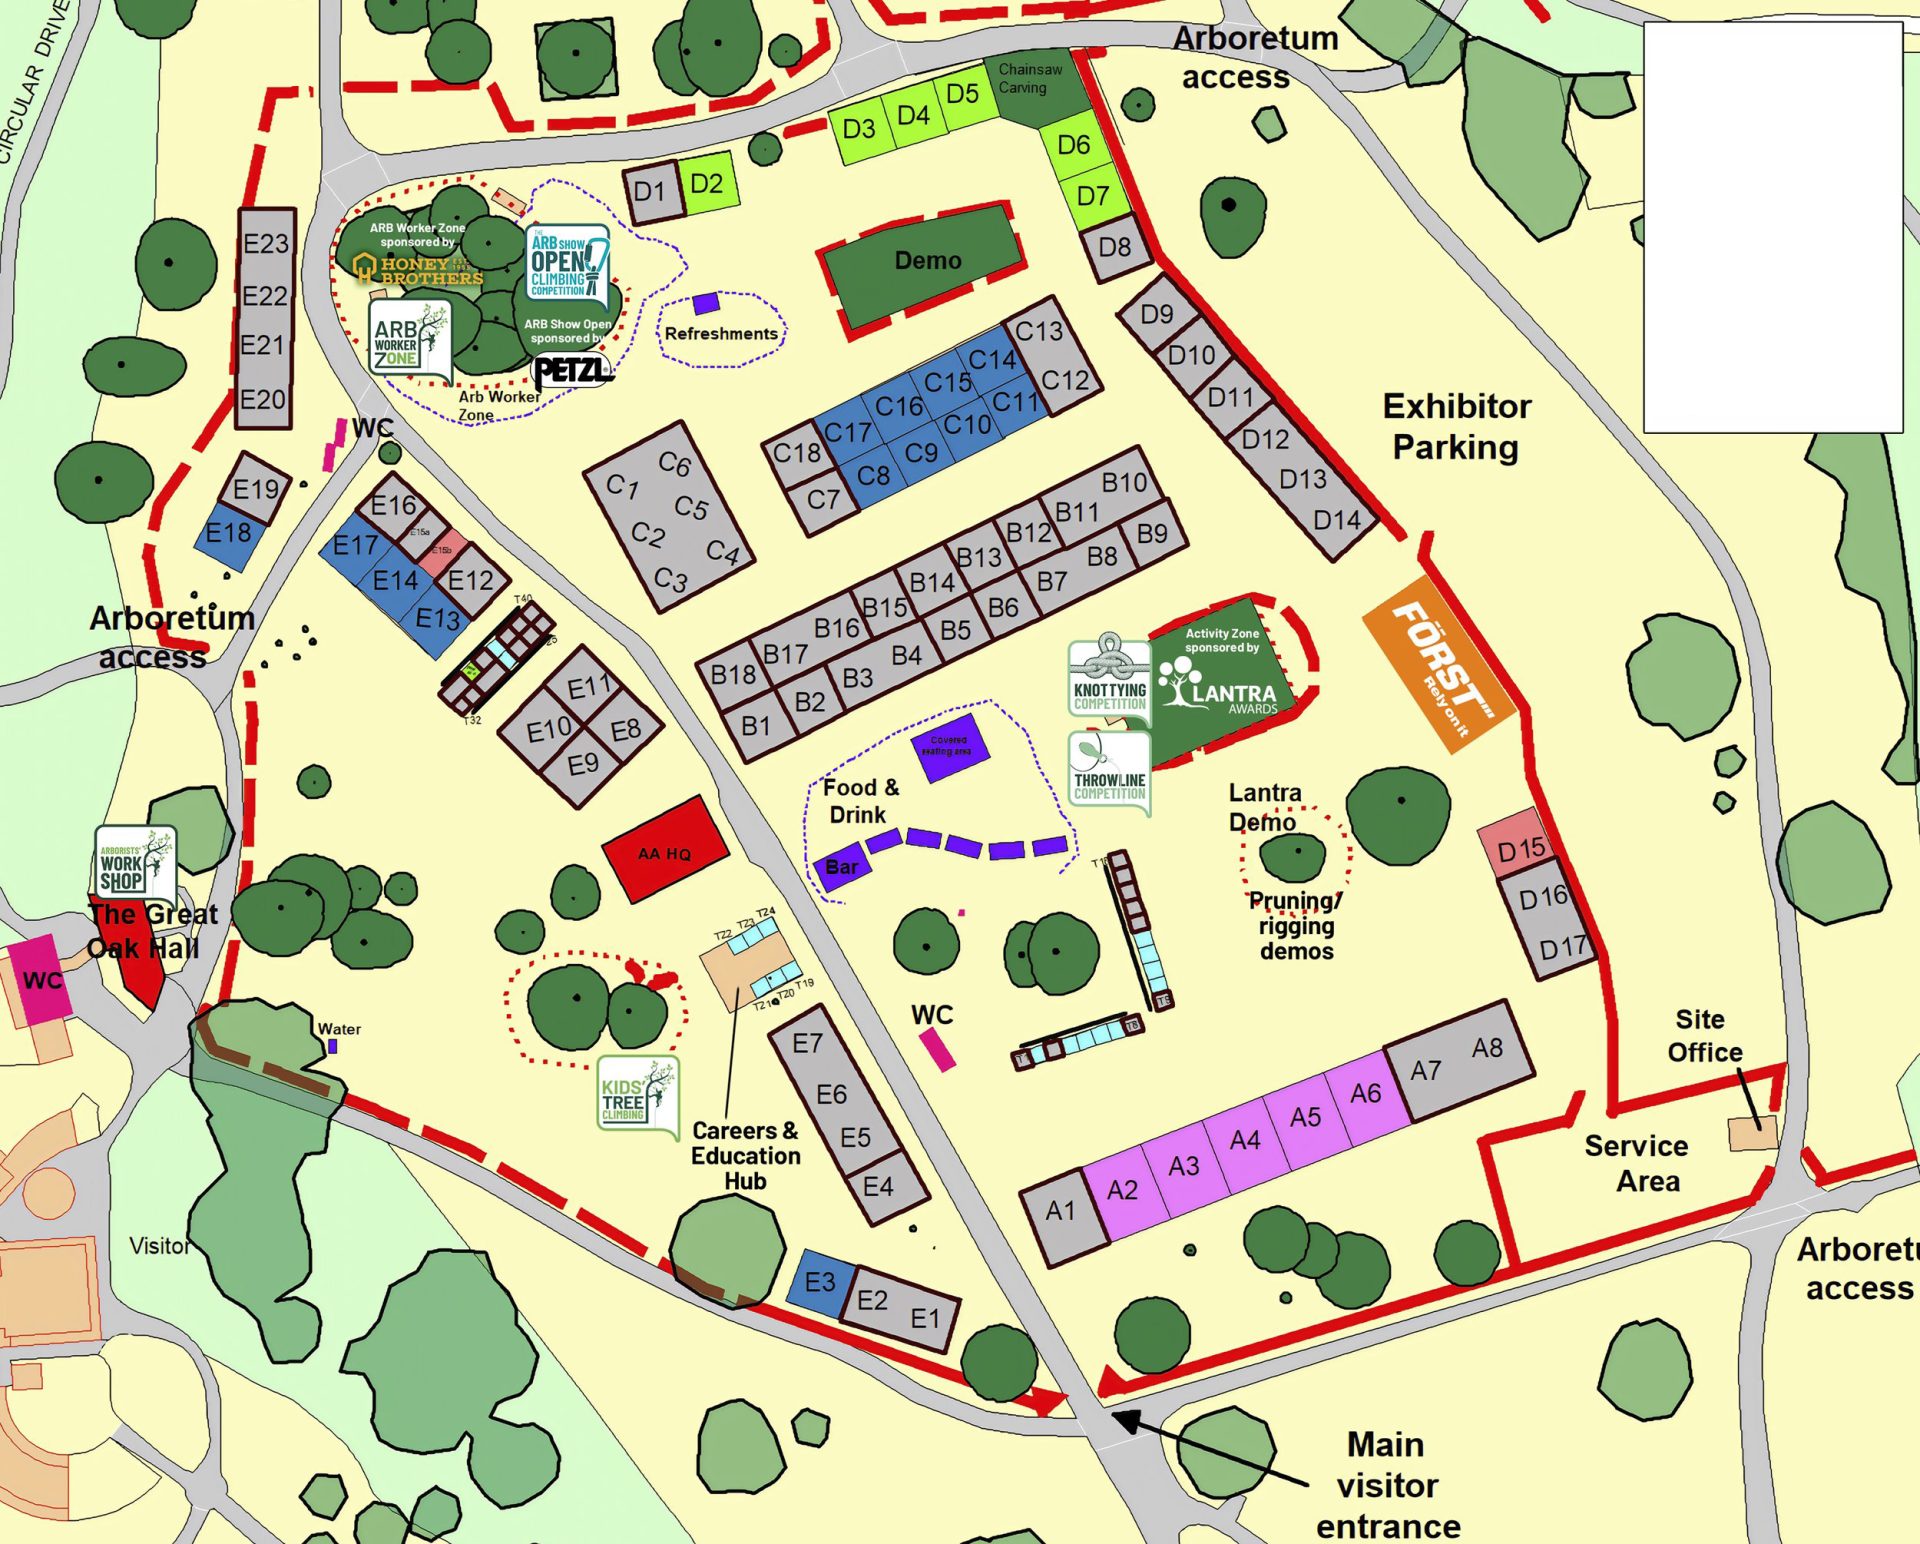 Exhibitor map for the 2024 Arb Show, Forest Research will appear at plot T34, right next to the Forestry Commission at T33.